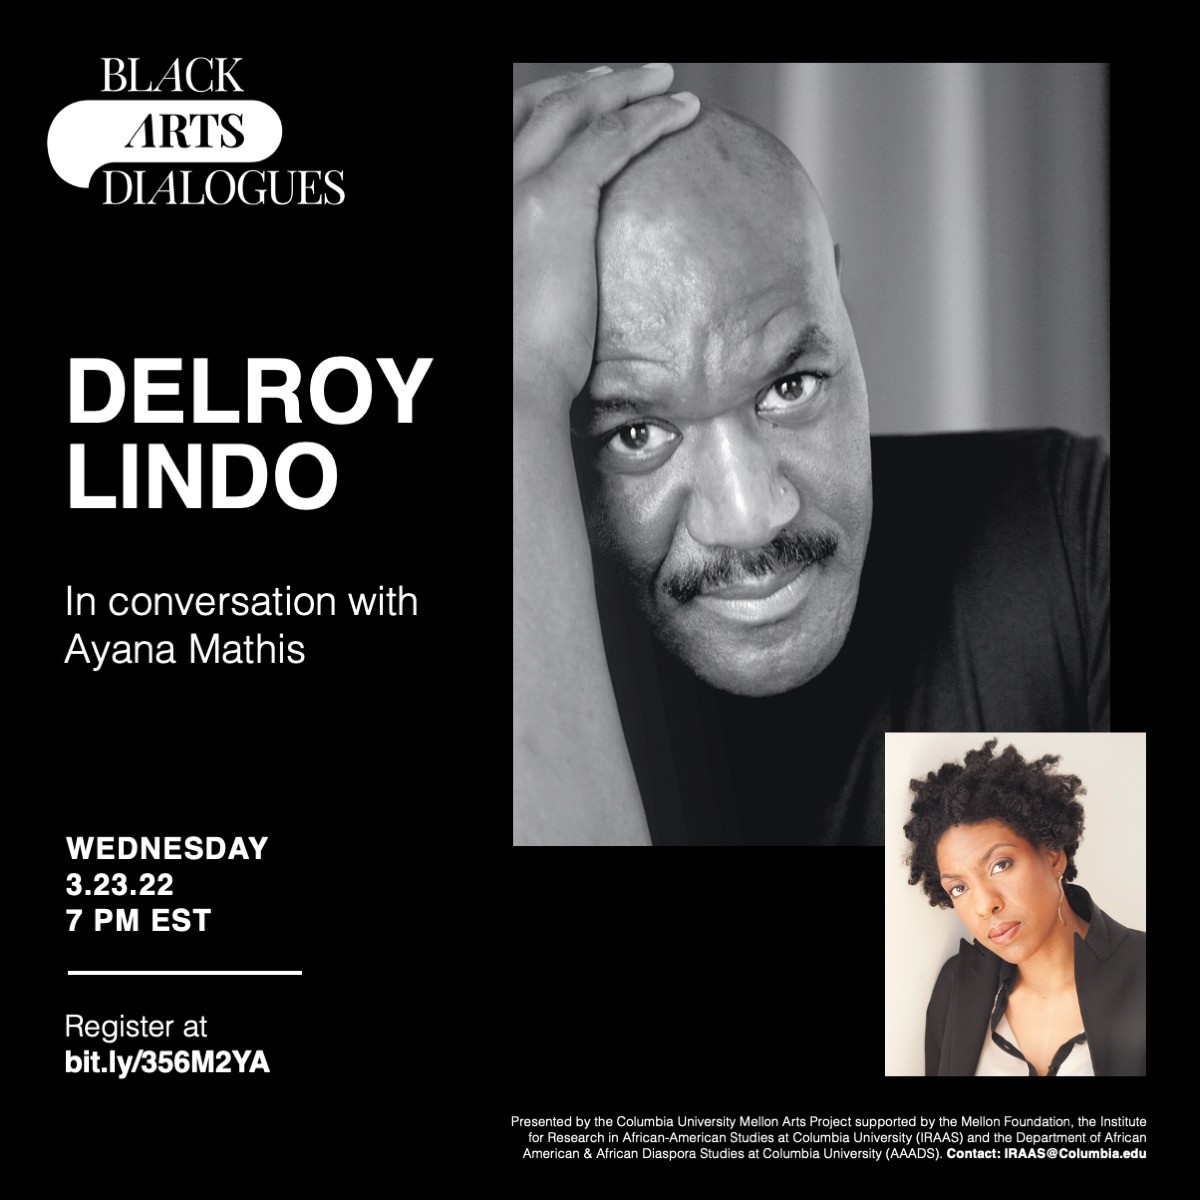 Image poster for The Black Arts Dialogues event with Ayana Mathis & Delroy Lindo